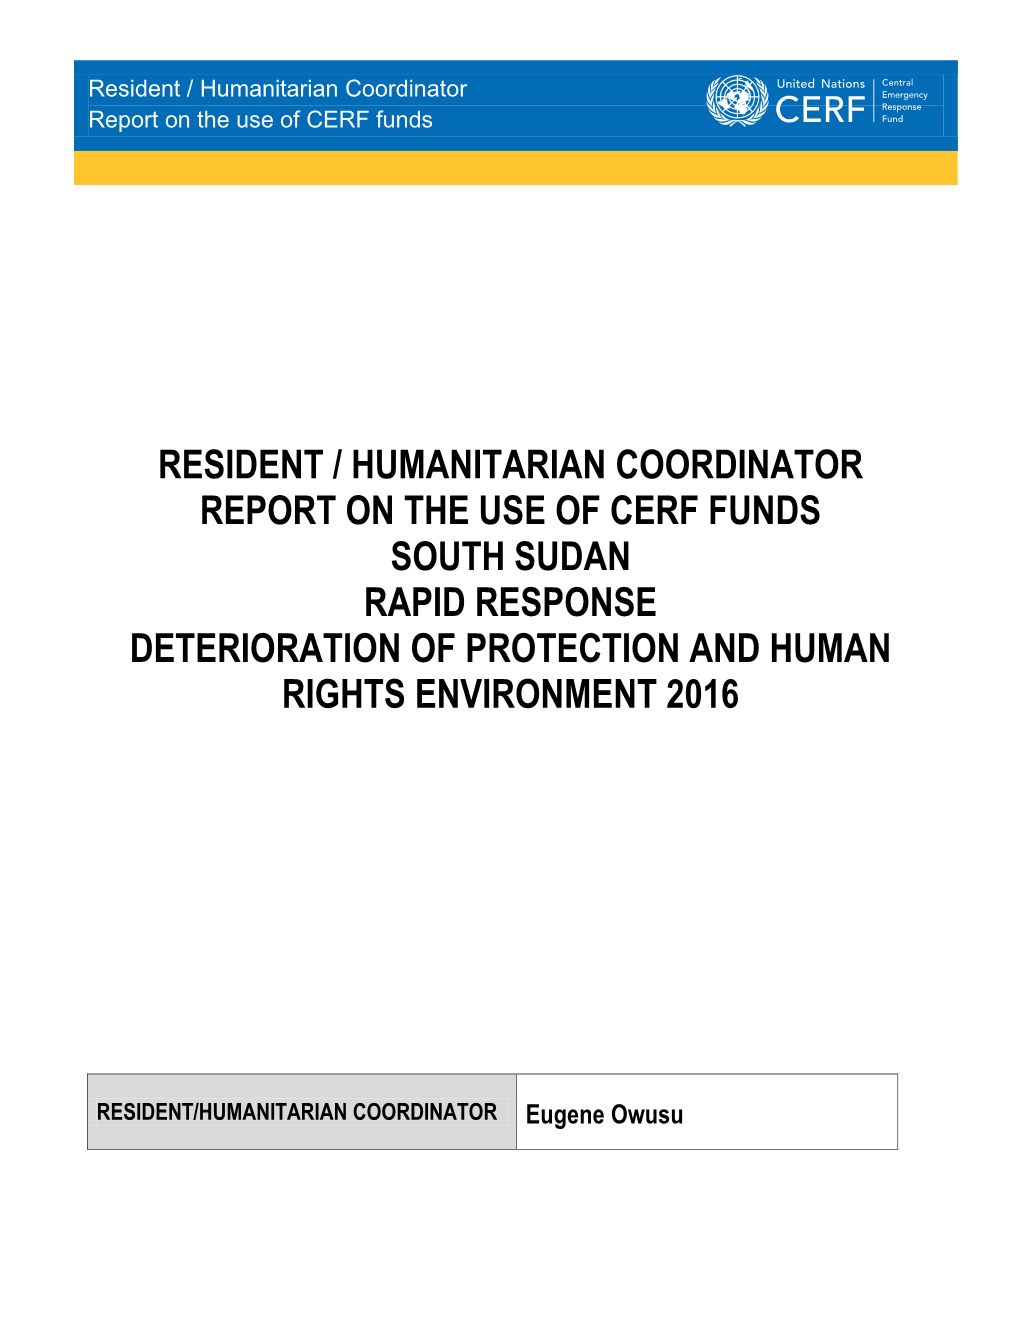 South Sudan Rapid Response Deterioration of Protection and Human Rights Environment 2016